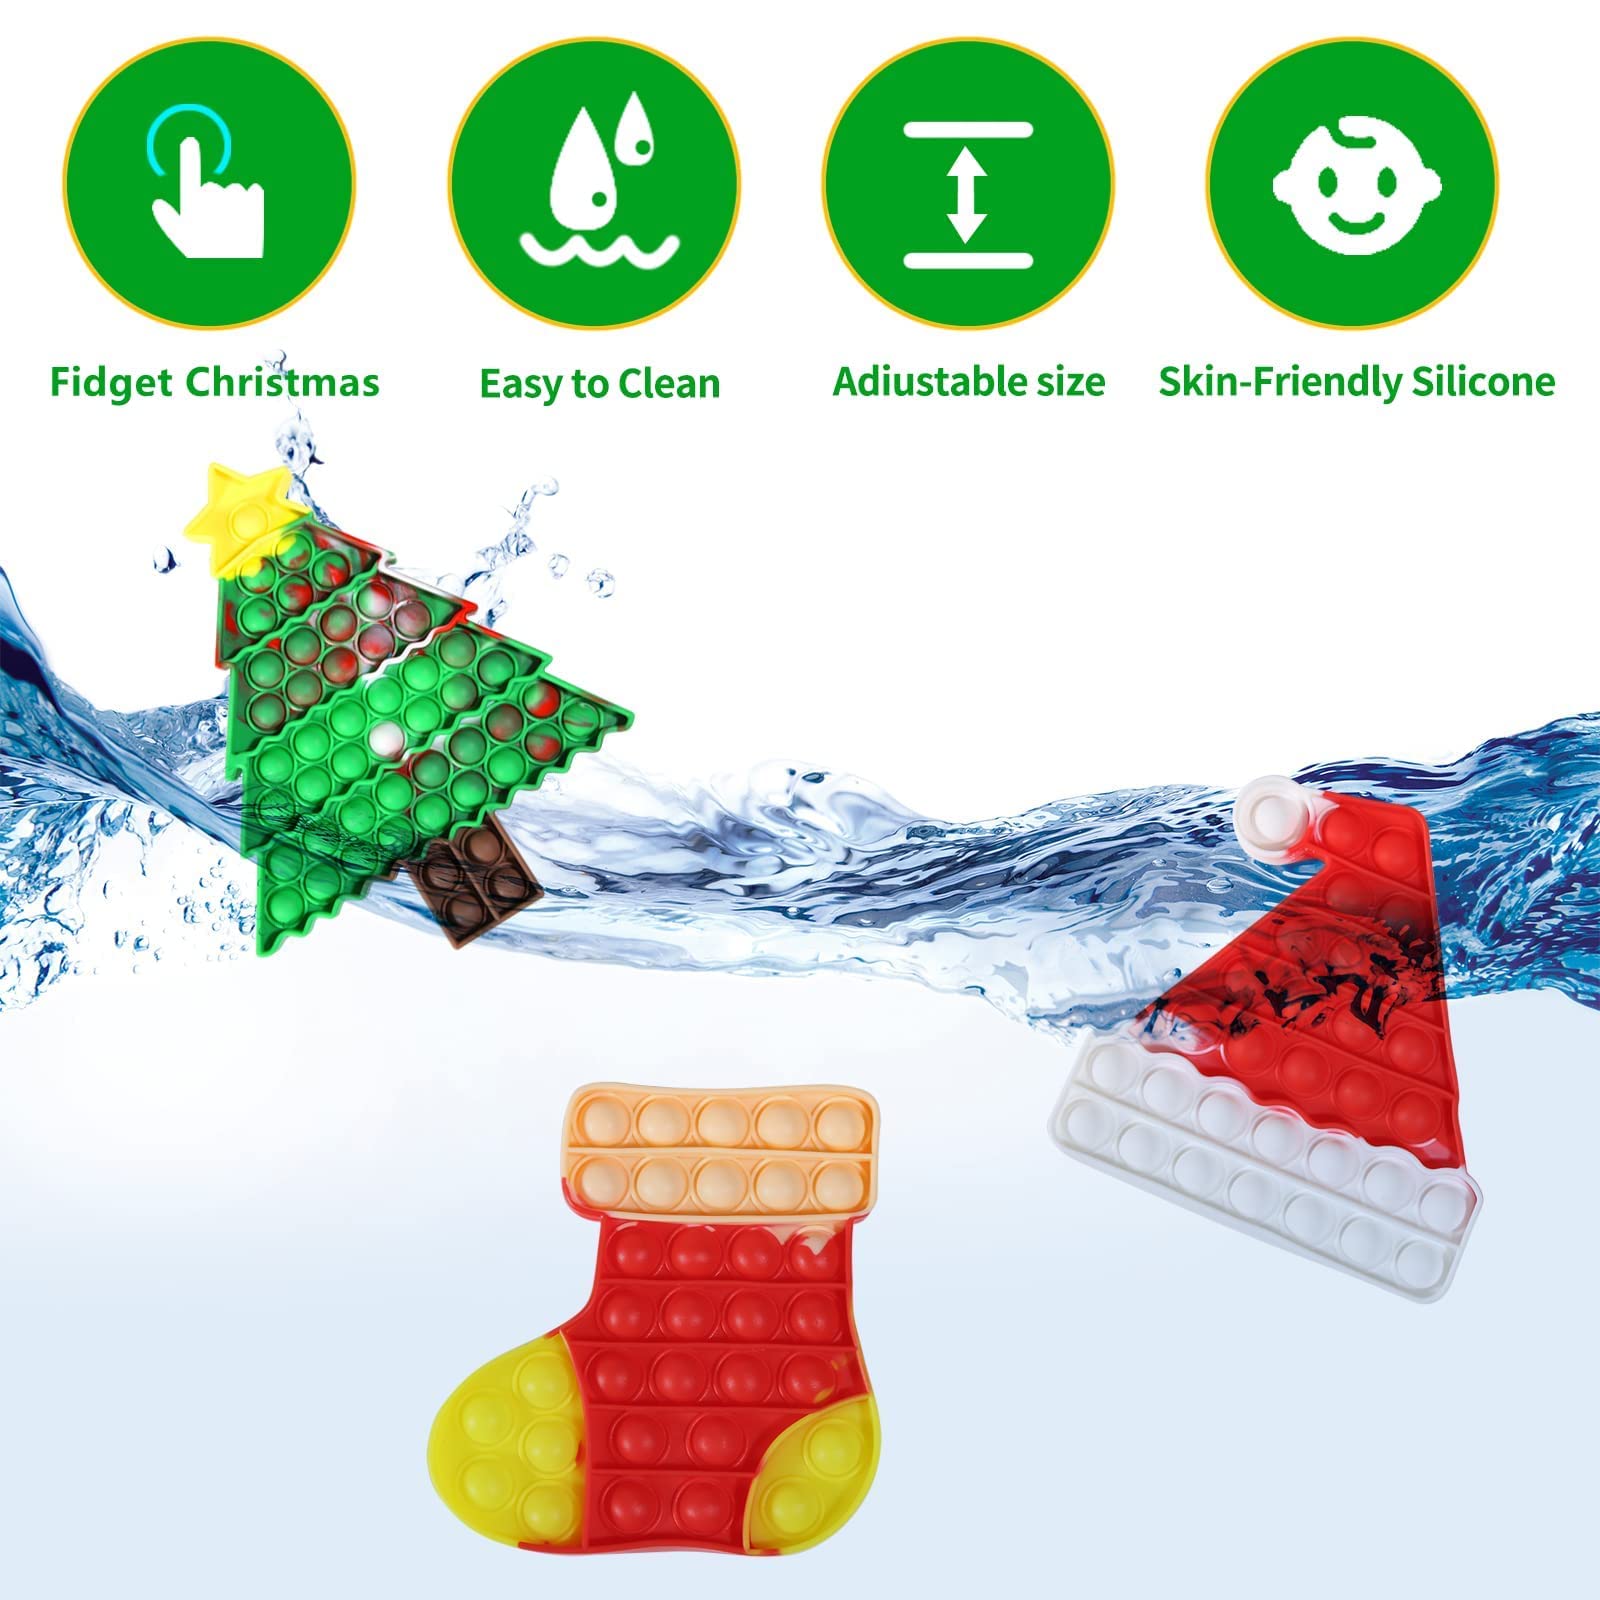 Hasoar 3 Pack Christmas Fidget Toys Set, Sensory Fidget Packs Christmas Tree, Hat and Stocking Silicone Stress Reliever Toy, Xmas Party Game Decor Gifts Sensory Toy for Kids